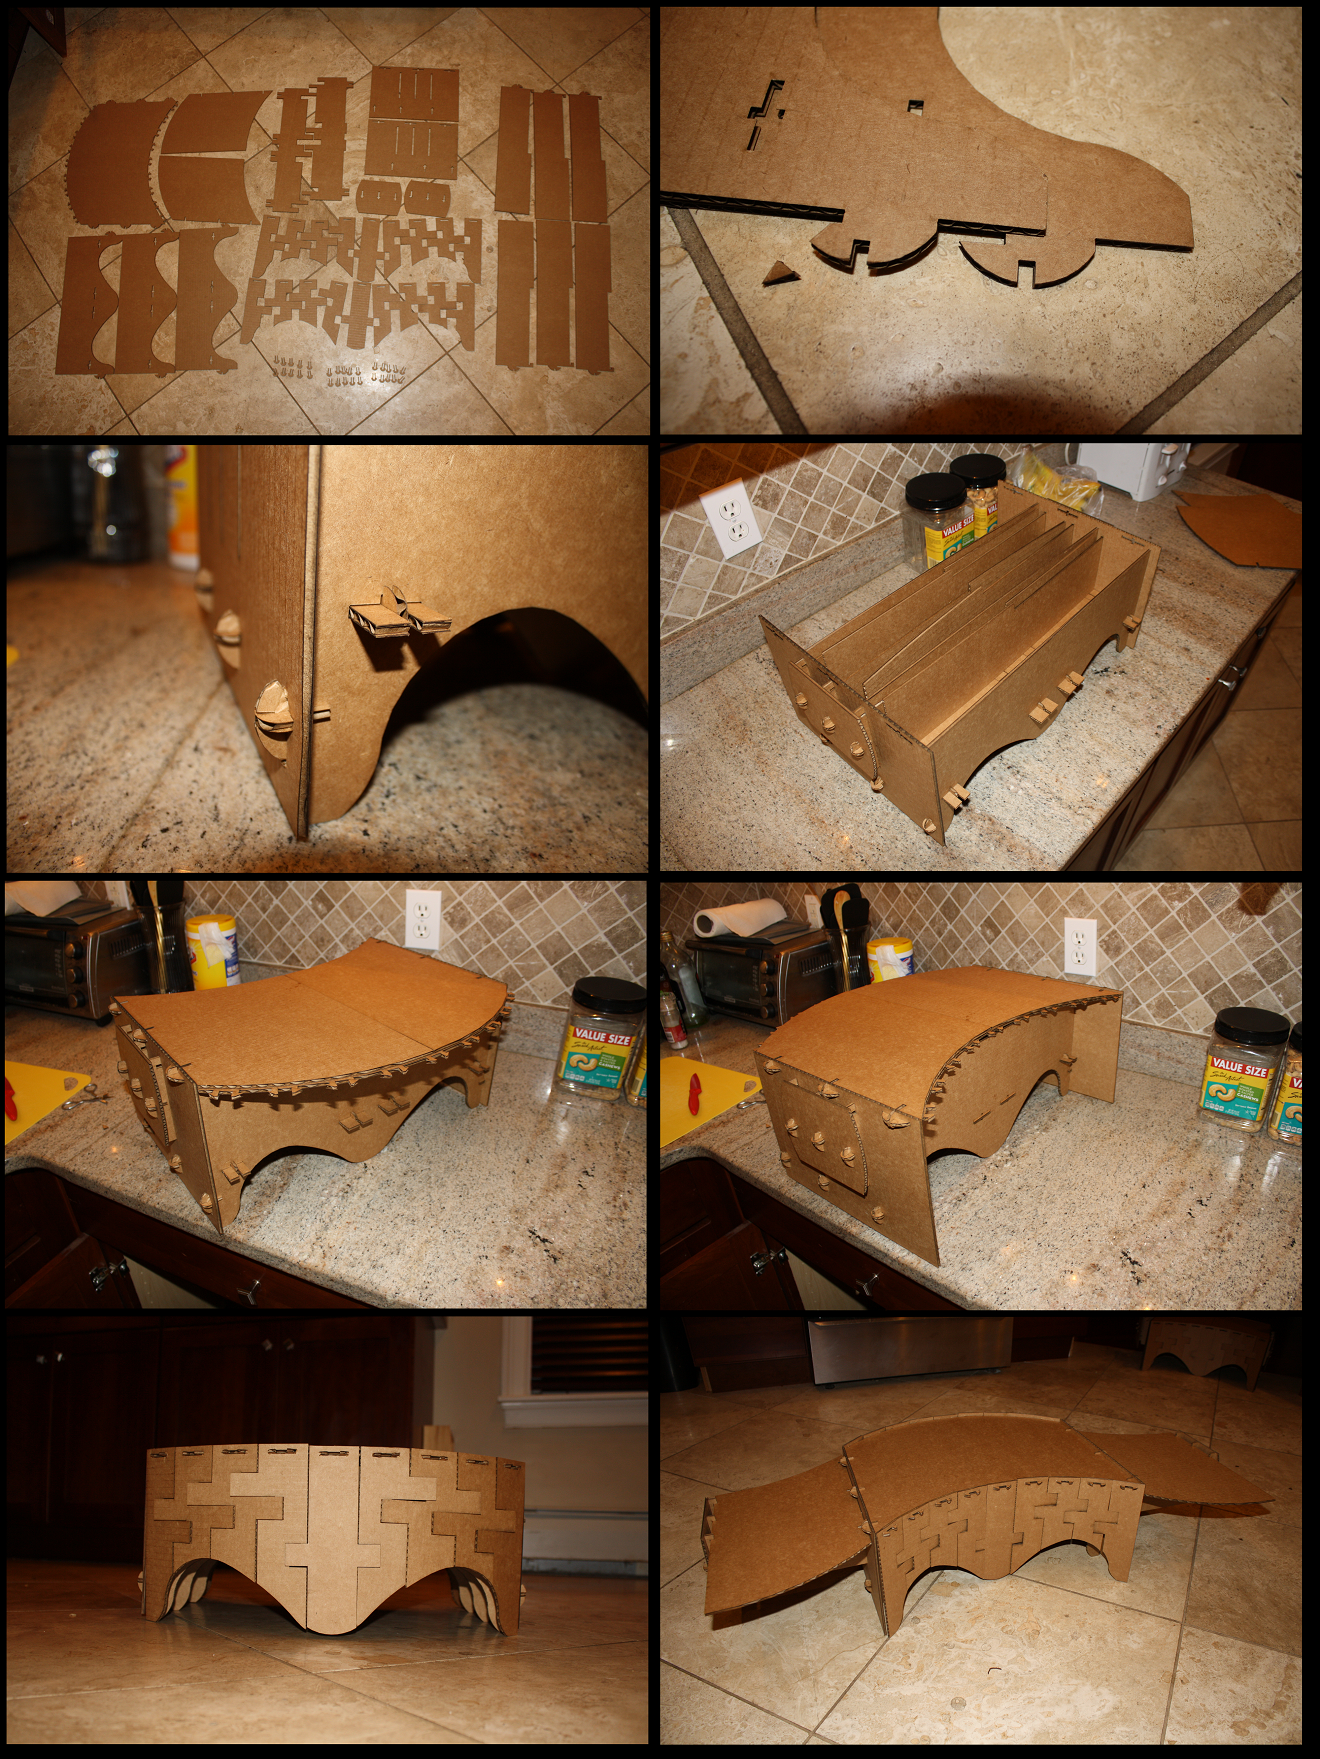 8 photos showing assembly progression of second desk, including cut pieces, internal frame, and final desk.